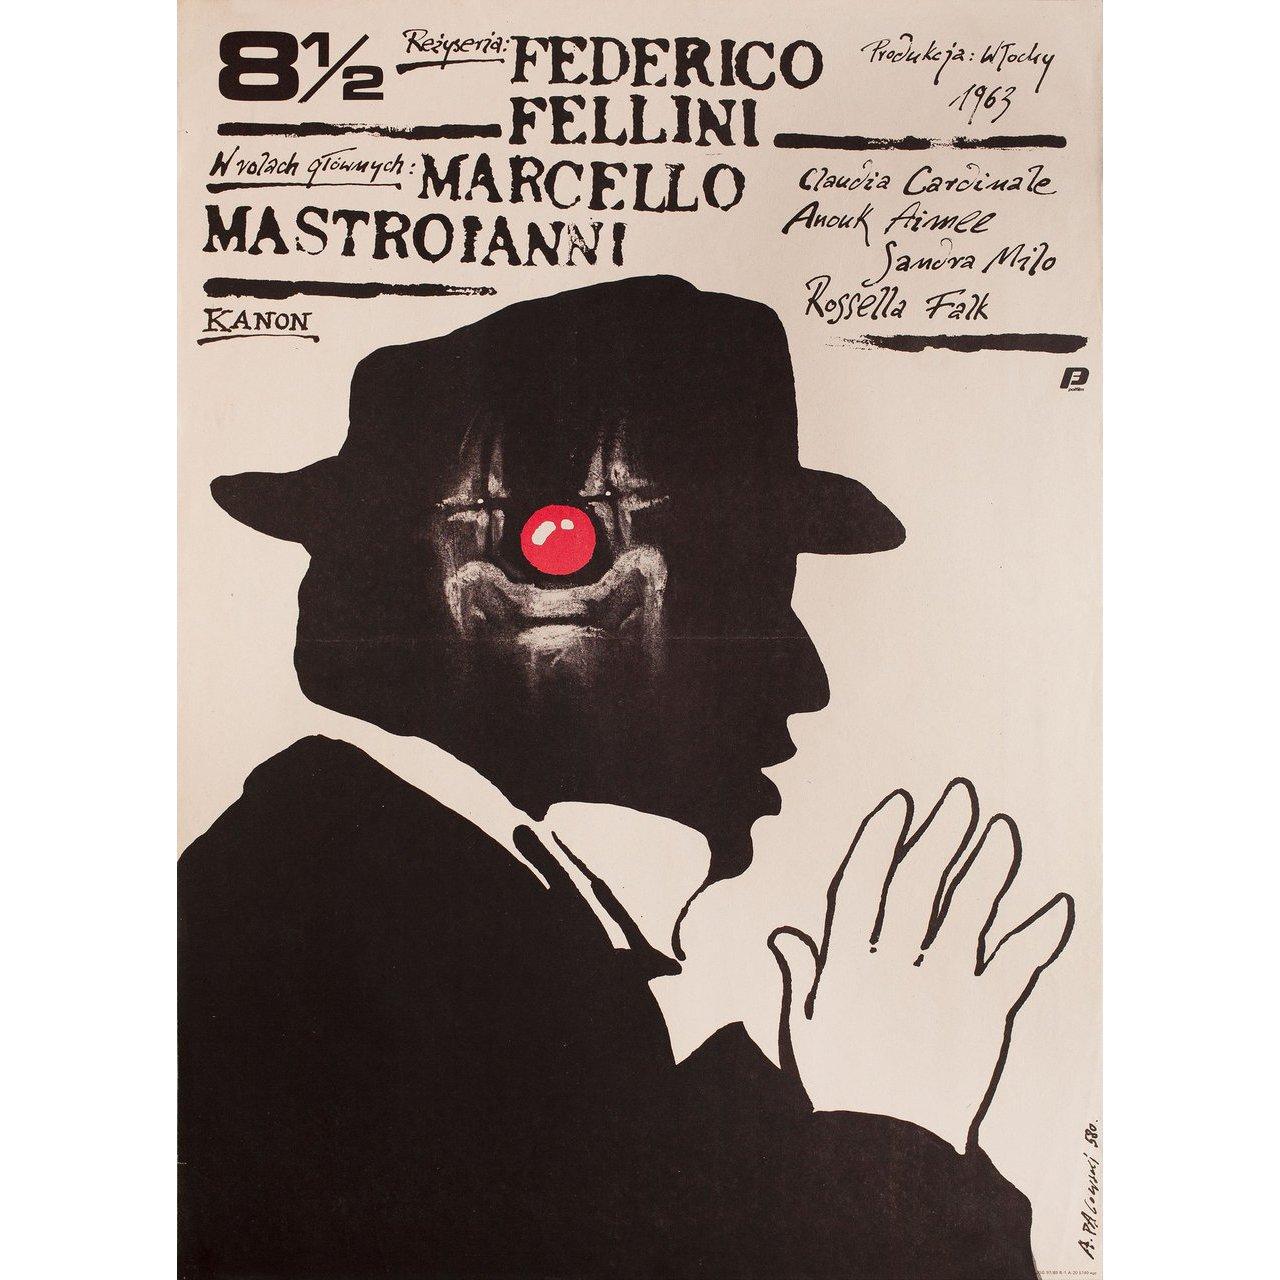 Original 1980s re-release Polish B1 poster by Andrzej Pagowski for the 1963 film 8 1/2 (8 1/2) directed by Federico Fellini with Marcello Mastroianni / Claudia Cardinale / Anouk Aimee / Sandra Milo. Very Good-Fine condition, rolled. Please note: the